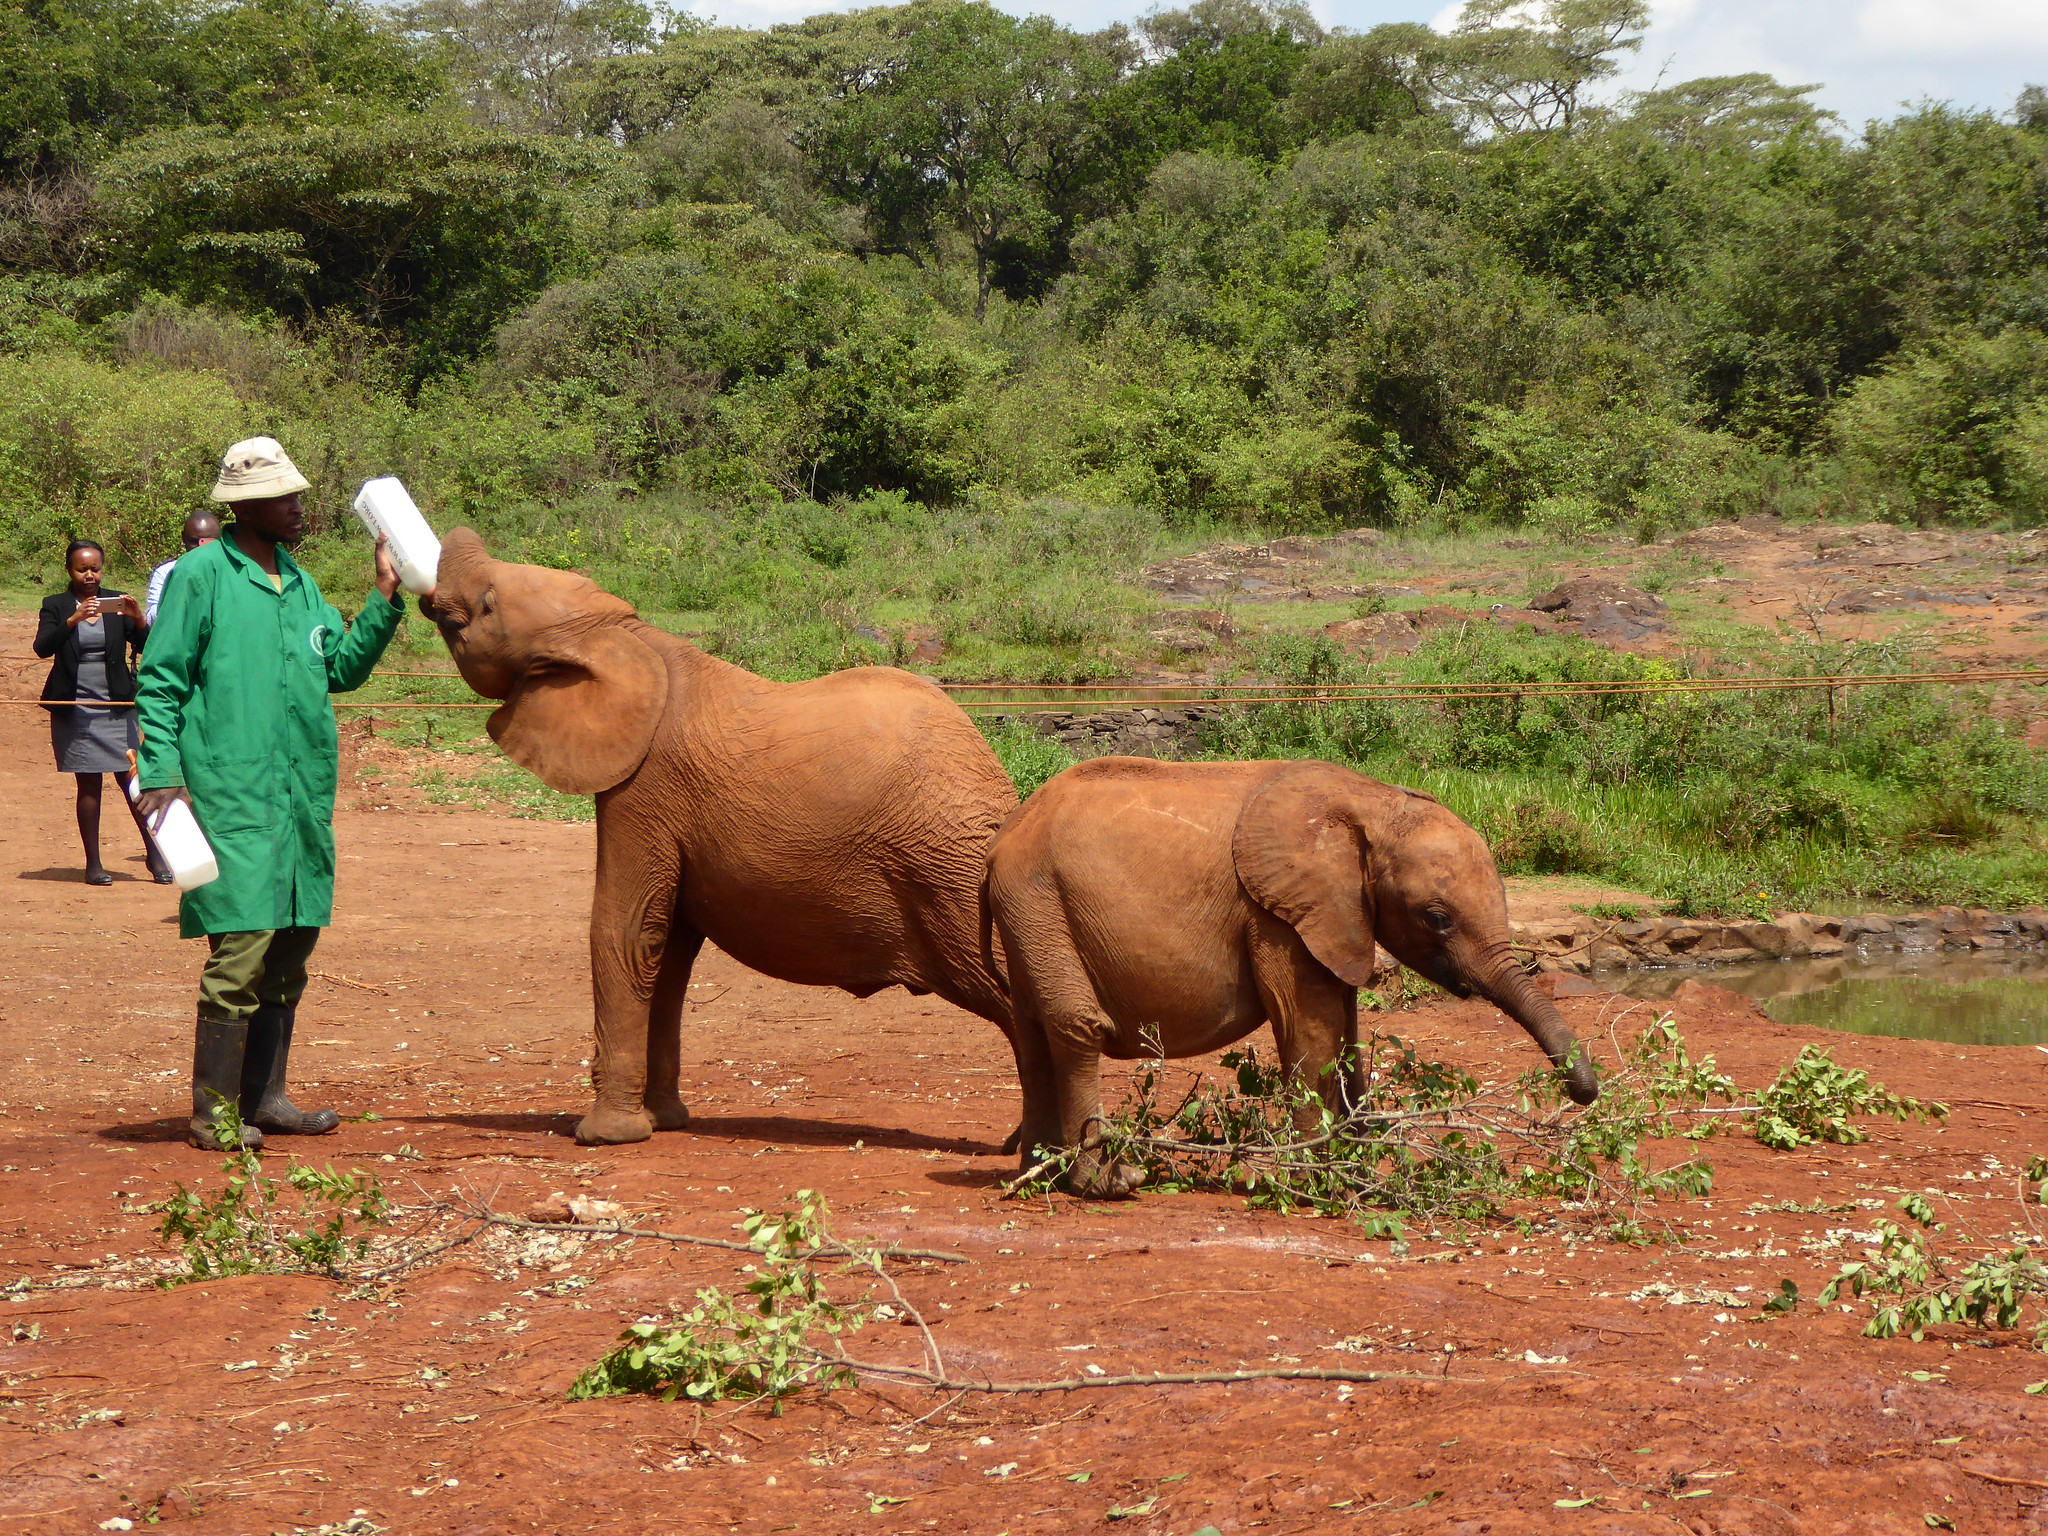 Baby elephant drinks milk replacement formula at Sheldrick Wildlife Trust's Orphans' Project while another young elephant plays with a branch in its trunk